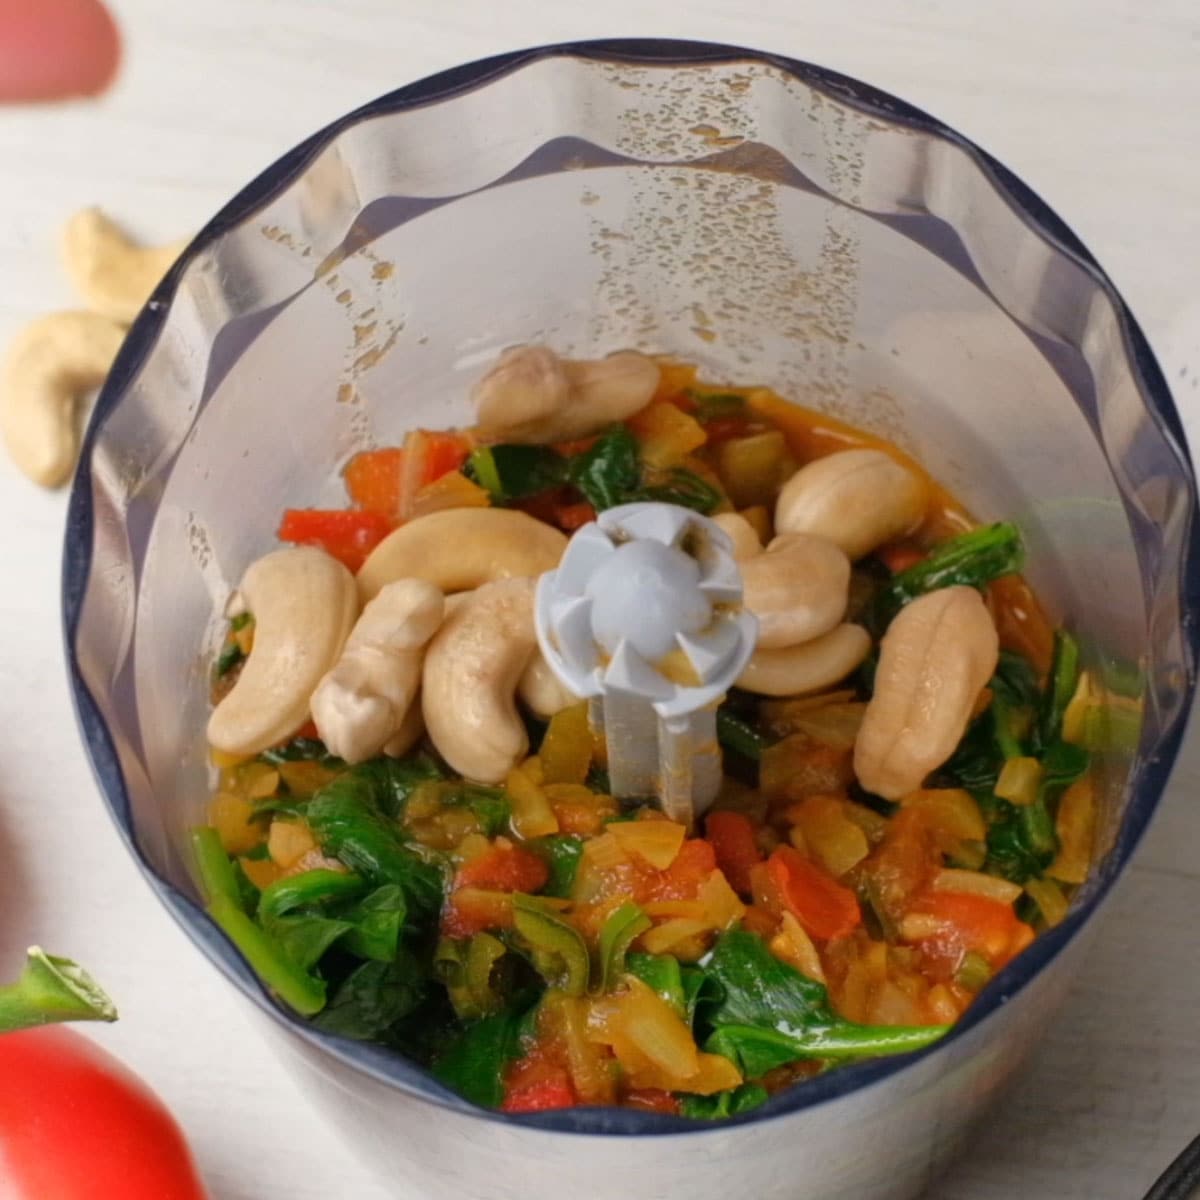 blend spinach, onion, and tomato gravy with cashews